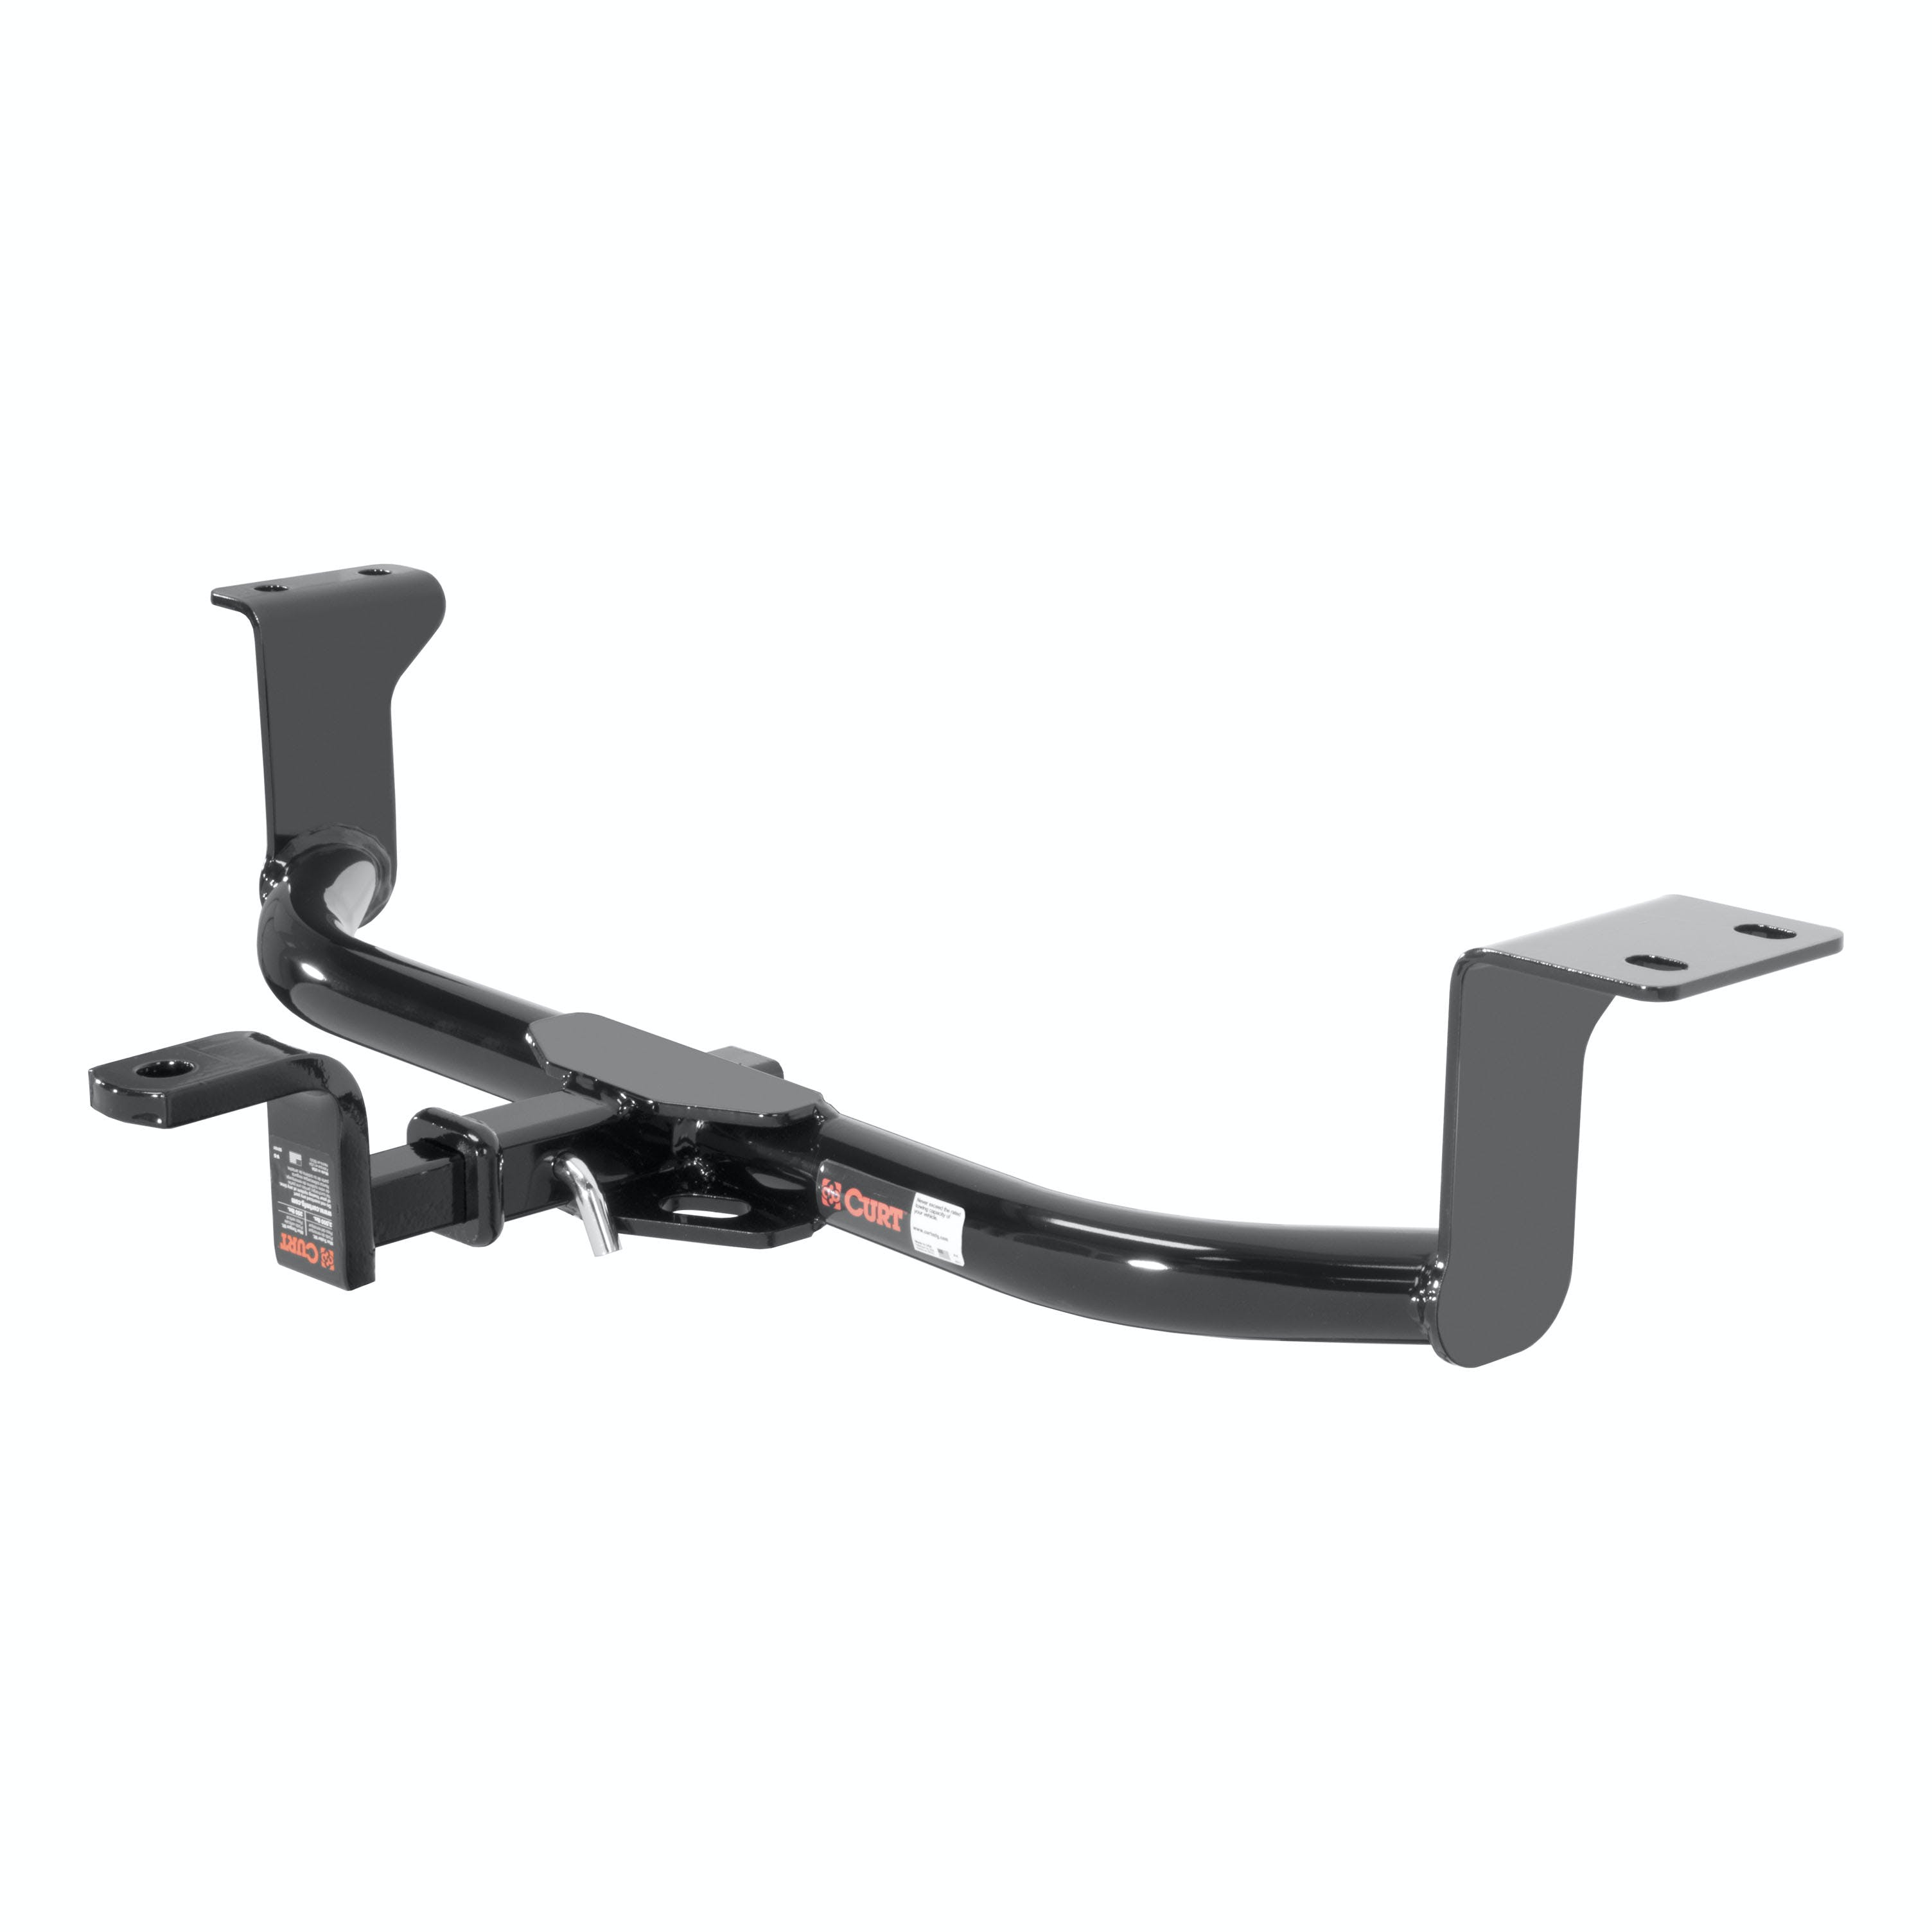 CURT 112763 Class 1 Trailer Hitch, 1-1/4 Ball Mount, Select Toyota Prius